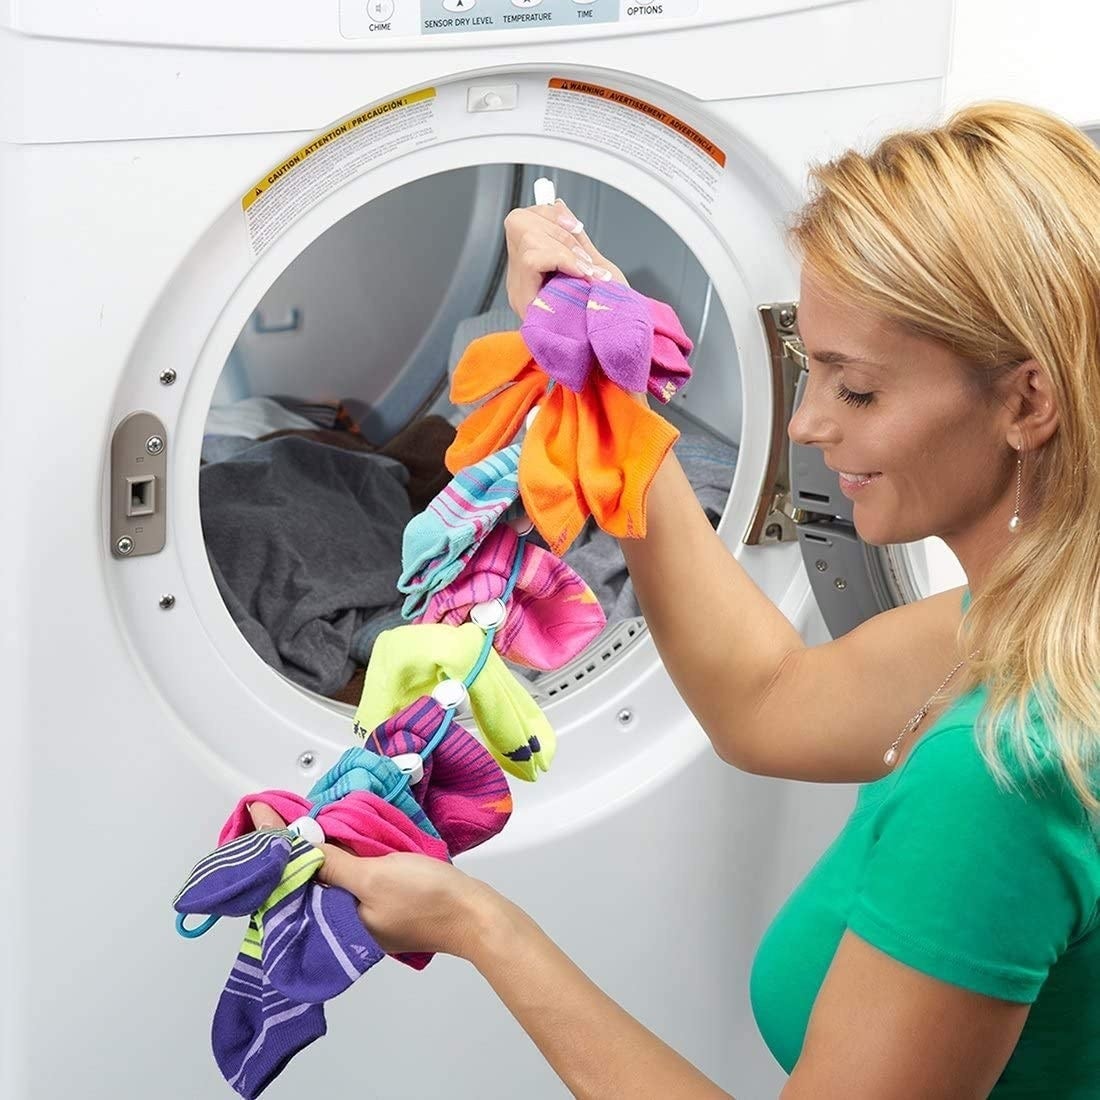 25 Laundry Products To Make The Chore Easier